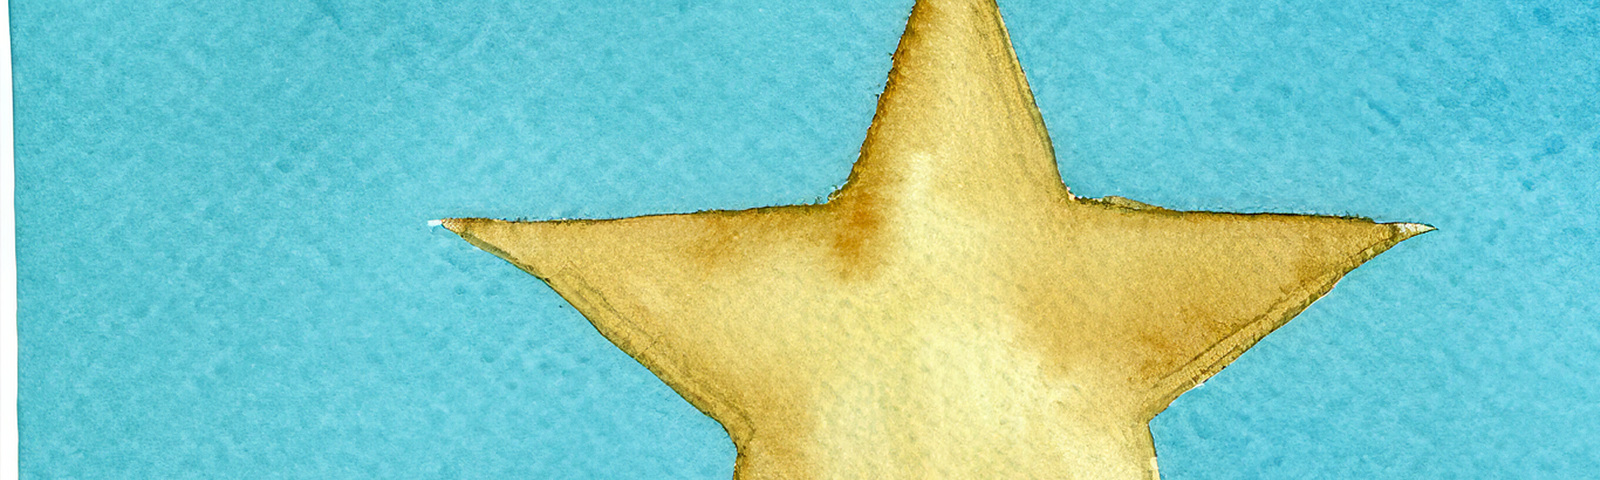 Digital painting of a gold star on a blue background